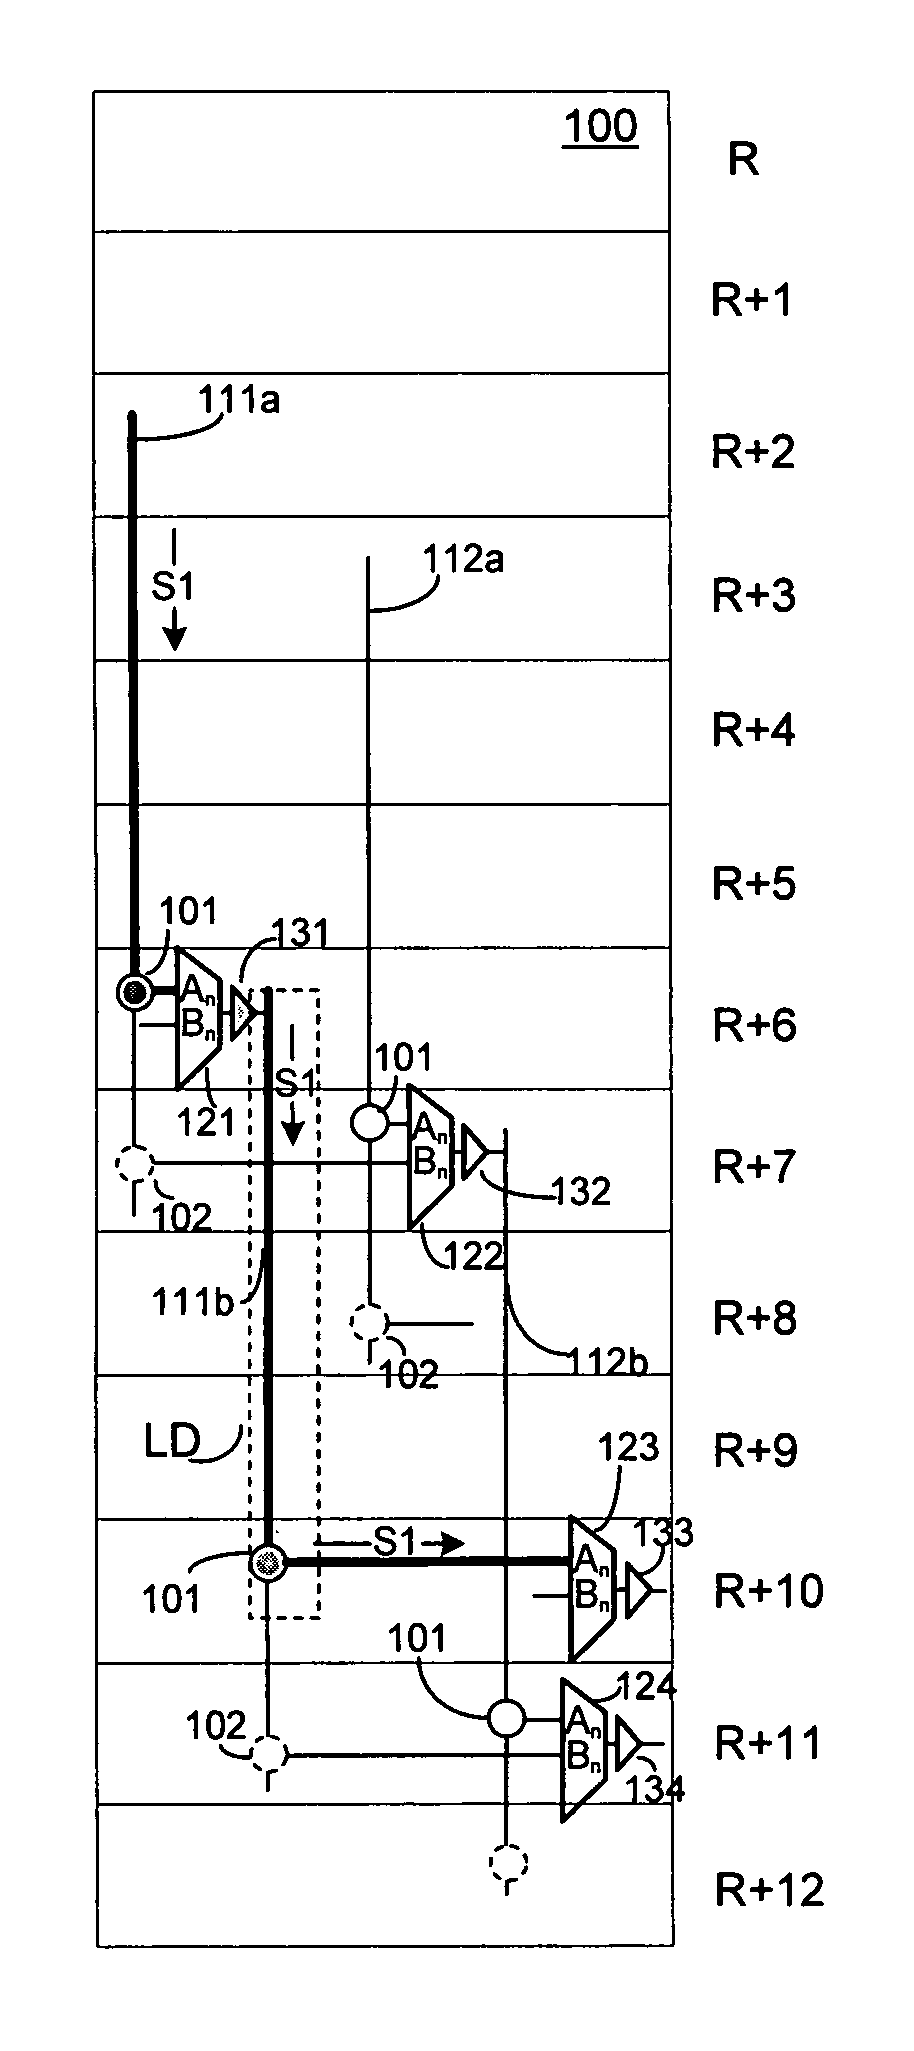 Redundancy structures and methods in a programmable logic device